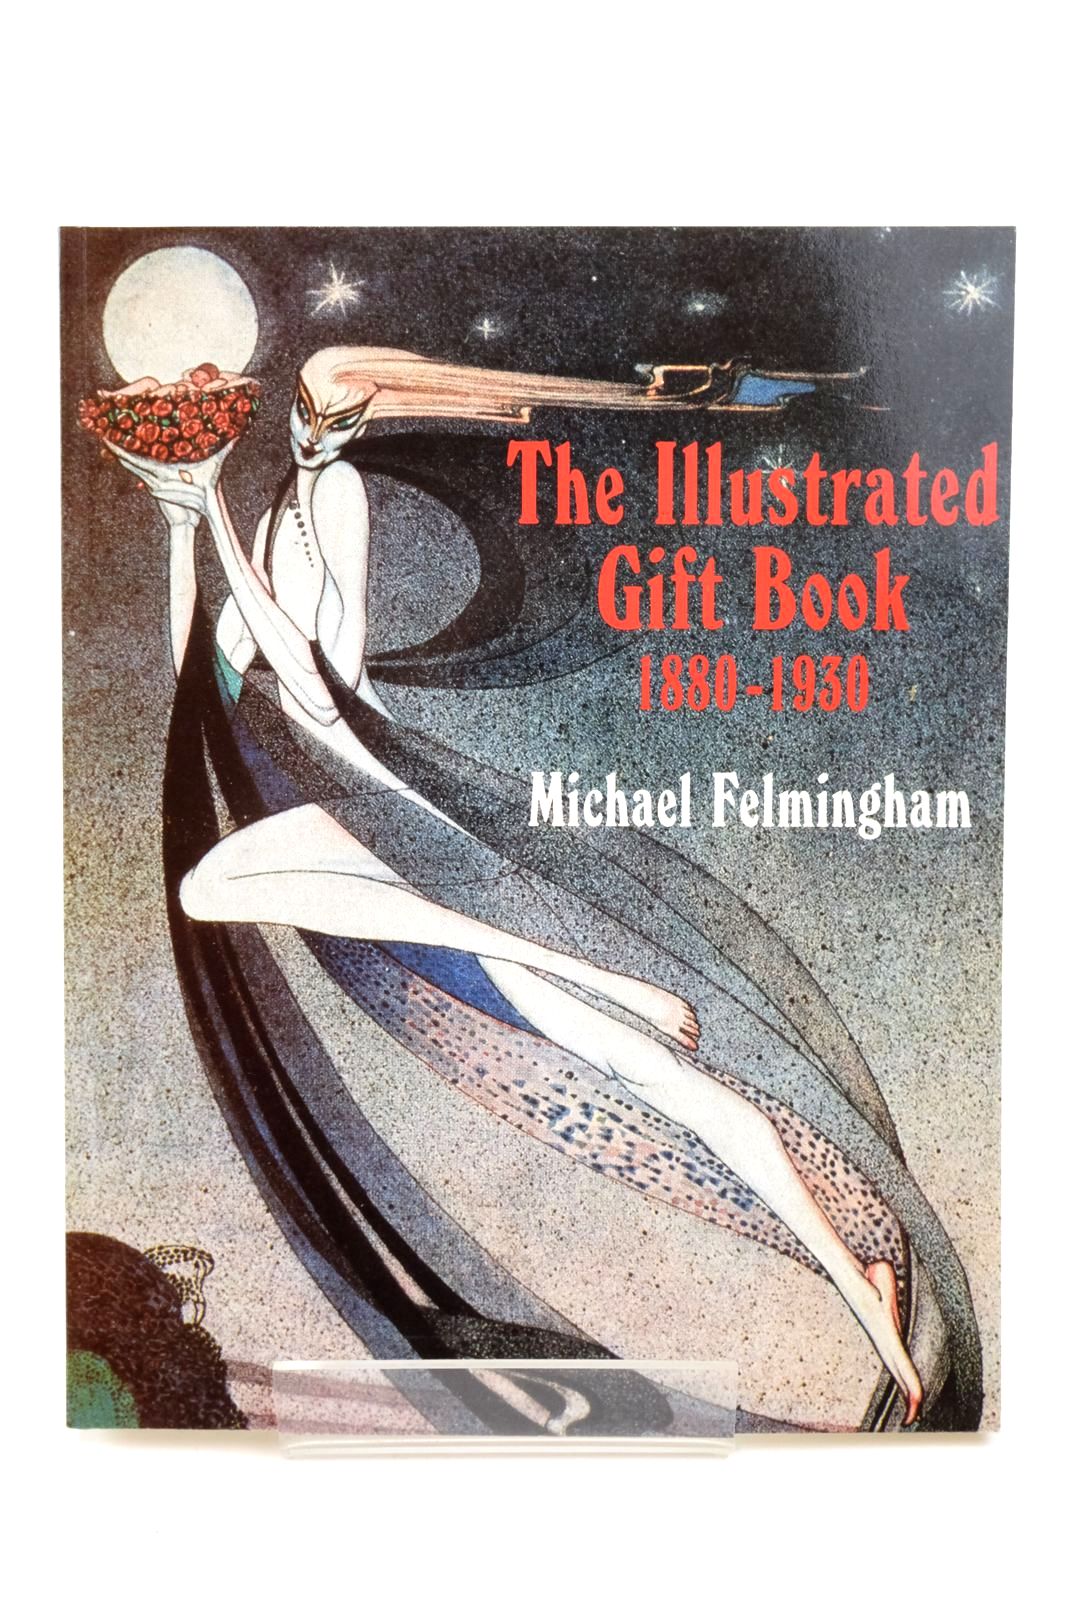 Photo of THE ILLUSTRATED GIFT BOOK 1880-1930 written by Felmingham, Michael published by Wildwood House Ltd. (STOCK CODE: 2138629)  for sale by Stella & Rose's Books